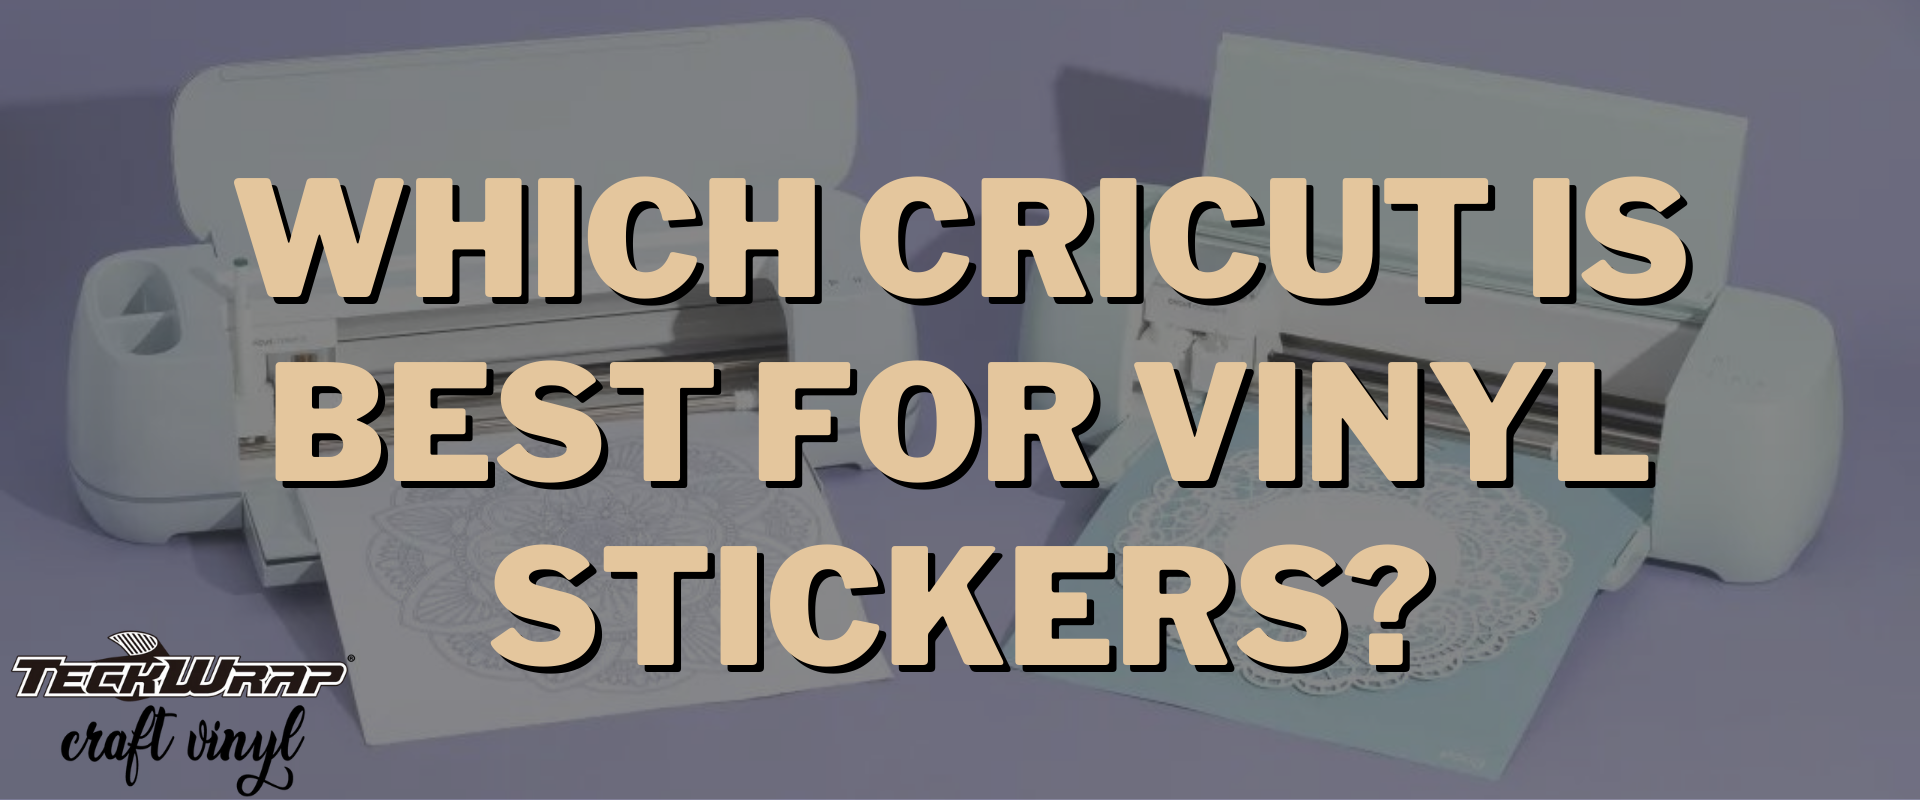 https://cdn.shopify.com/s/files/1/0074/7382/3855/t/30/assets/which-cricut-is-best-for-vinyl-stickers-1-1688552481062.png?v=1688552515